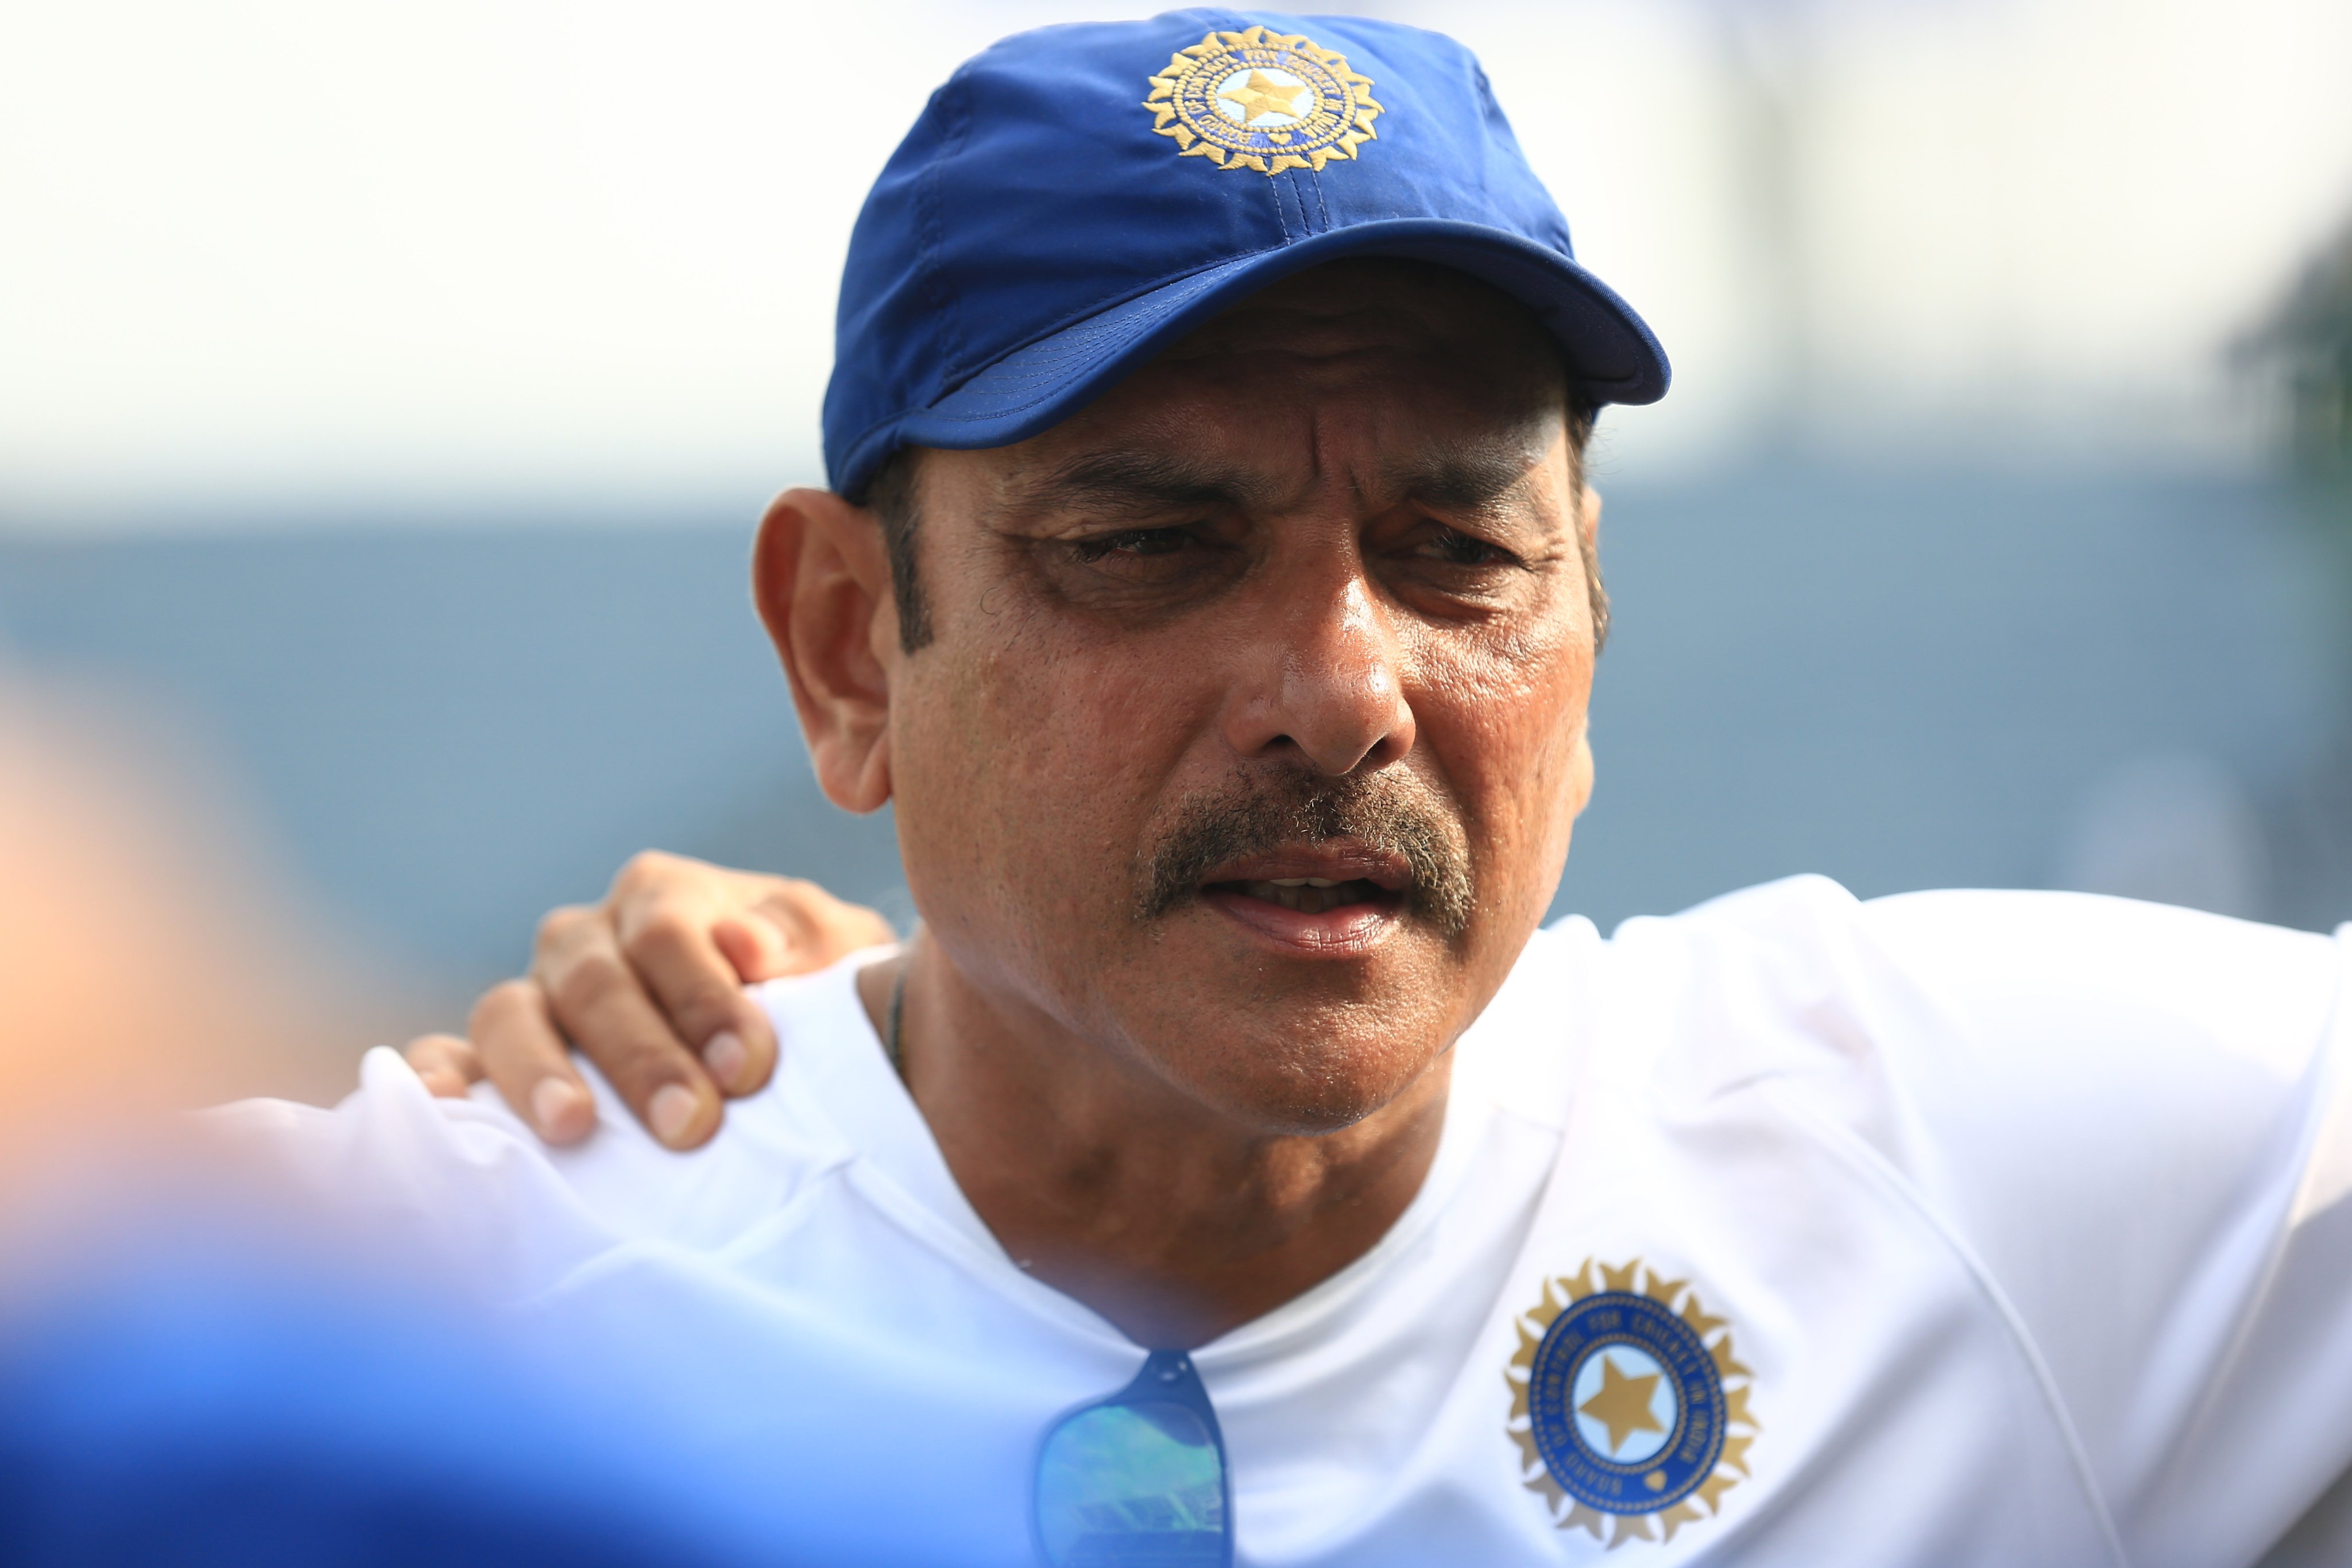 ‘Please don’t shift the goalpost mid-match’ - Ravi Shastri chastises ICC for WTC rule change